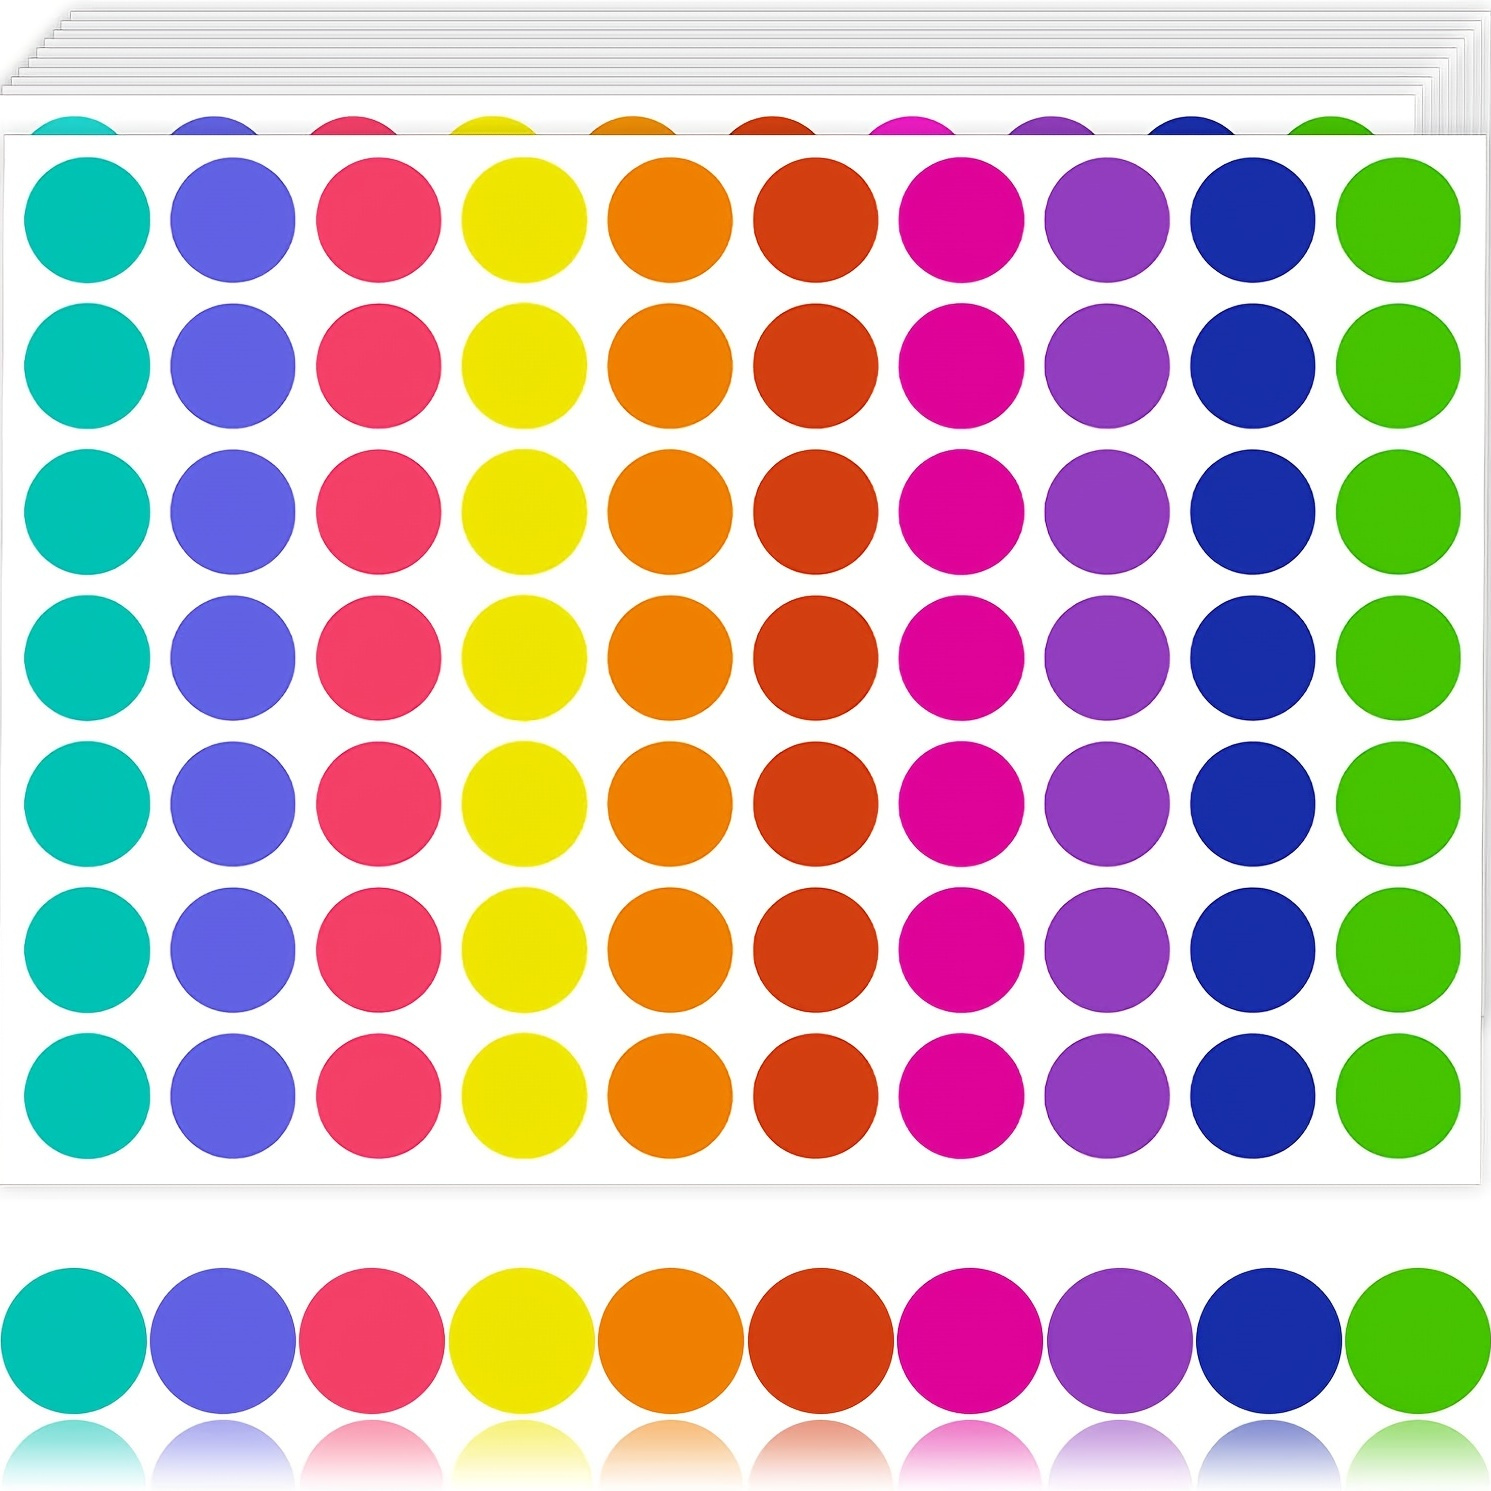 Dreecy 1400 Pcs Colored Dot Stickers Round Color Coding Labels Polka Circle Dot Label Sticker for Office,Classroom,Papers Etc